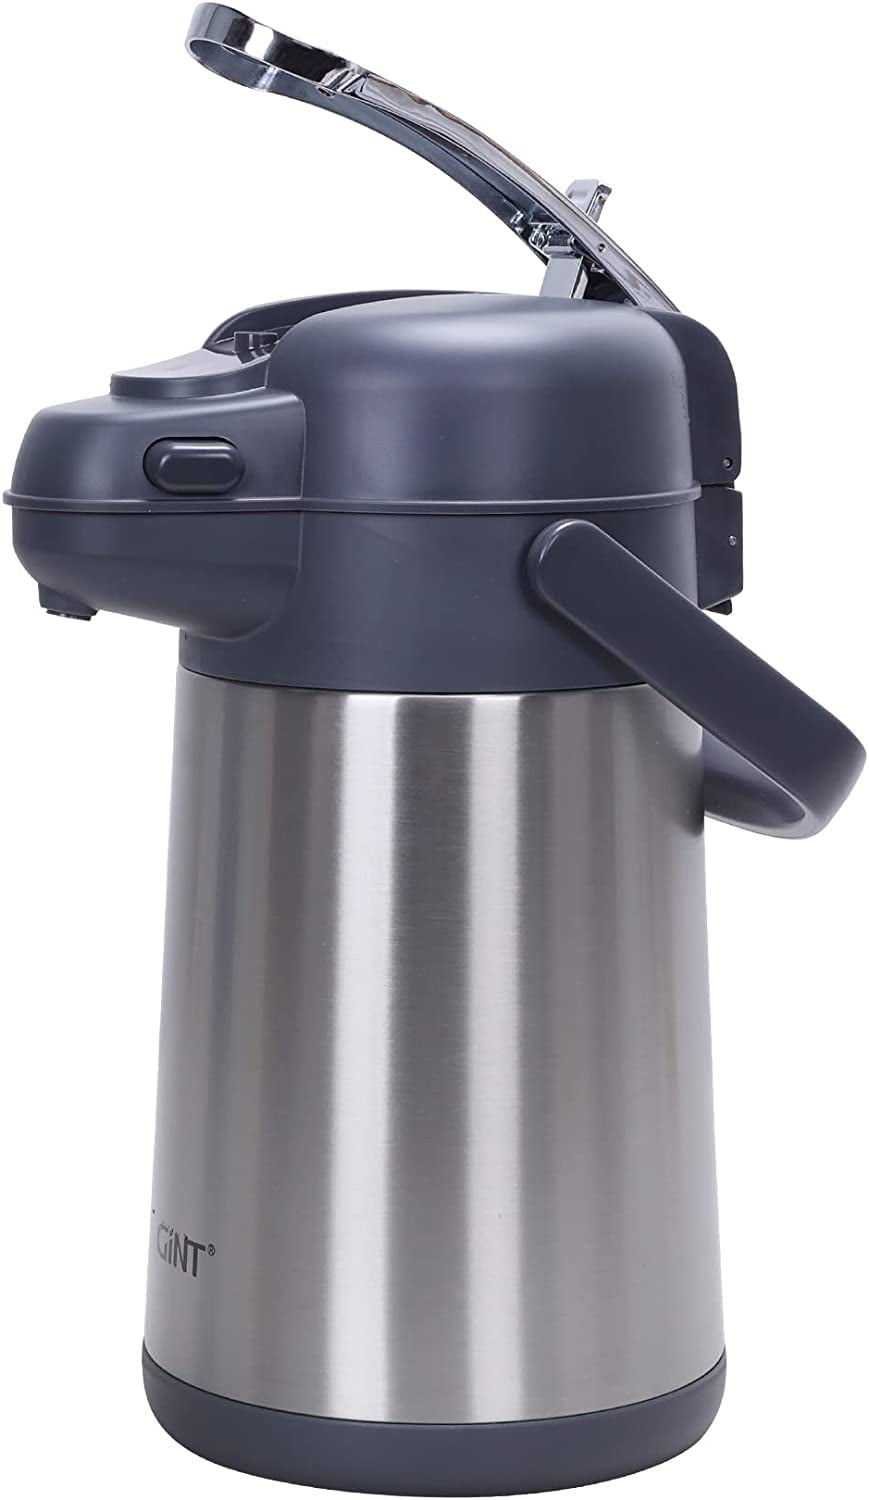 Coffee Airpot Thermal Carafe Dispenser with Pump Double Walled